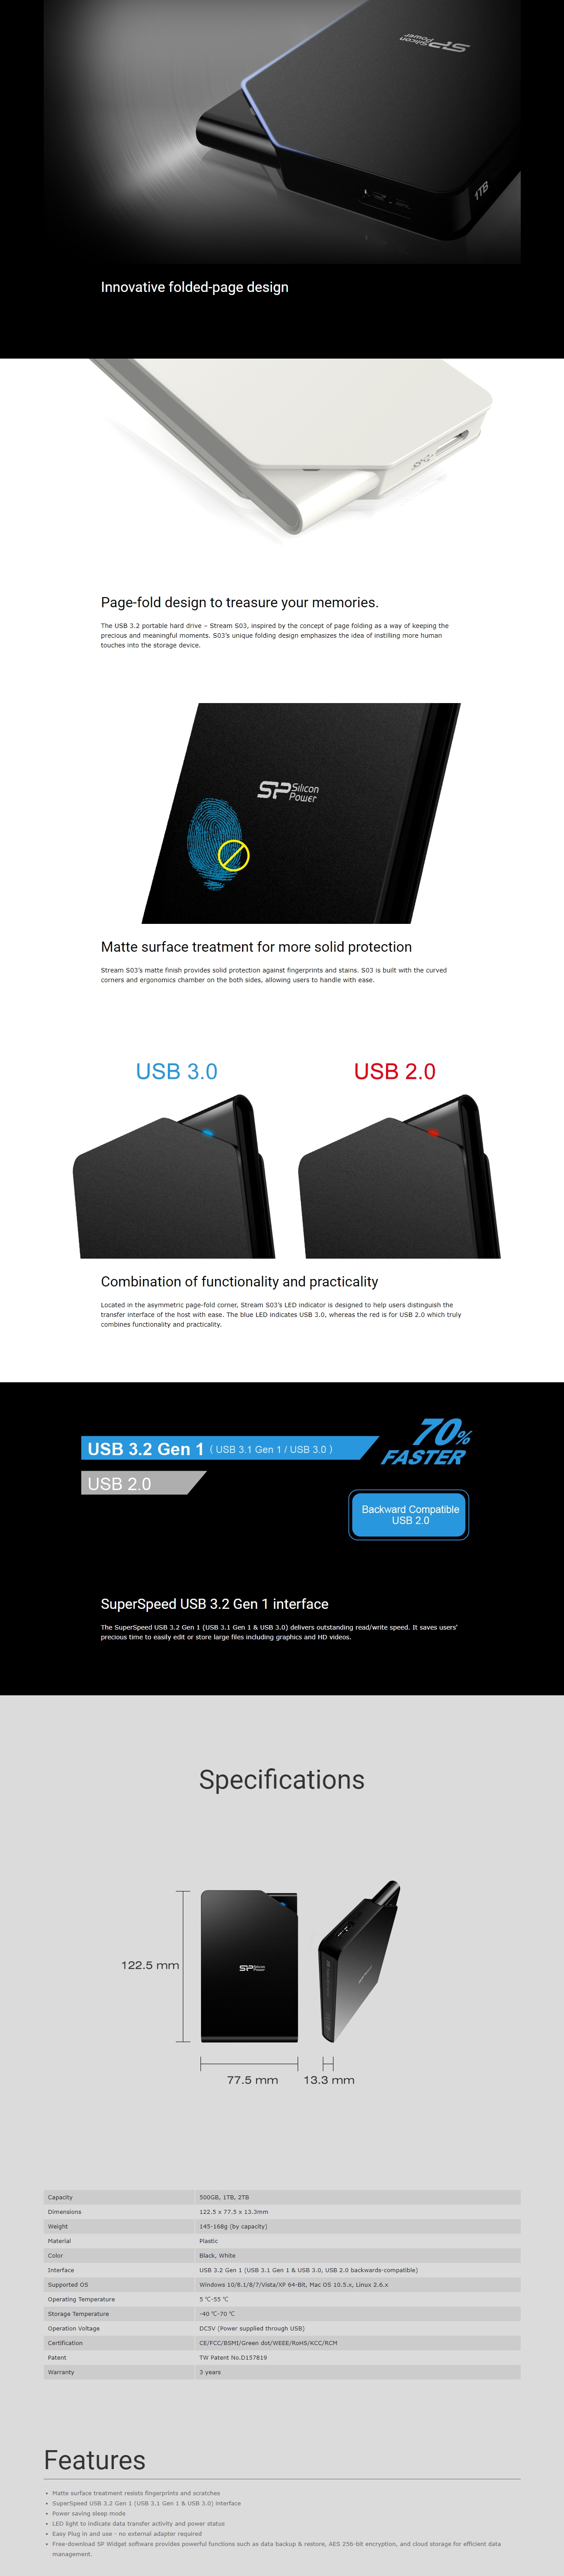 A large marketing image providing additional information about the product Silicon Power Stream S03 2TB USB 3.2 Gen 1 External Hard Drive - Black - Additional alt info not provided